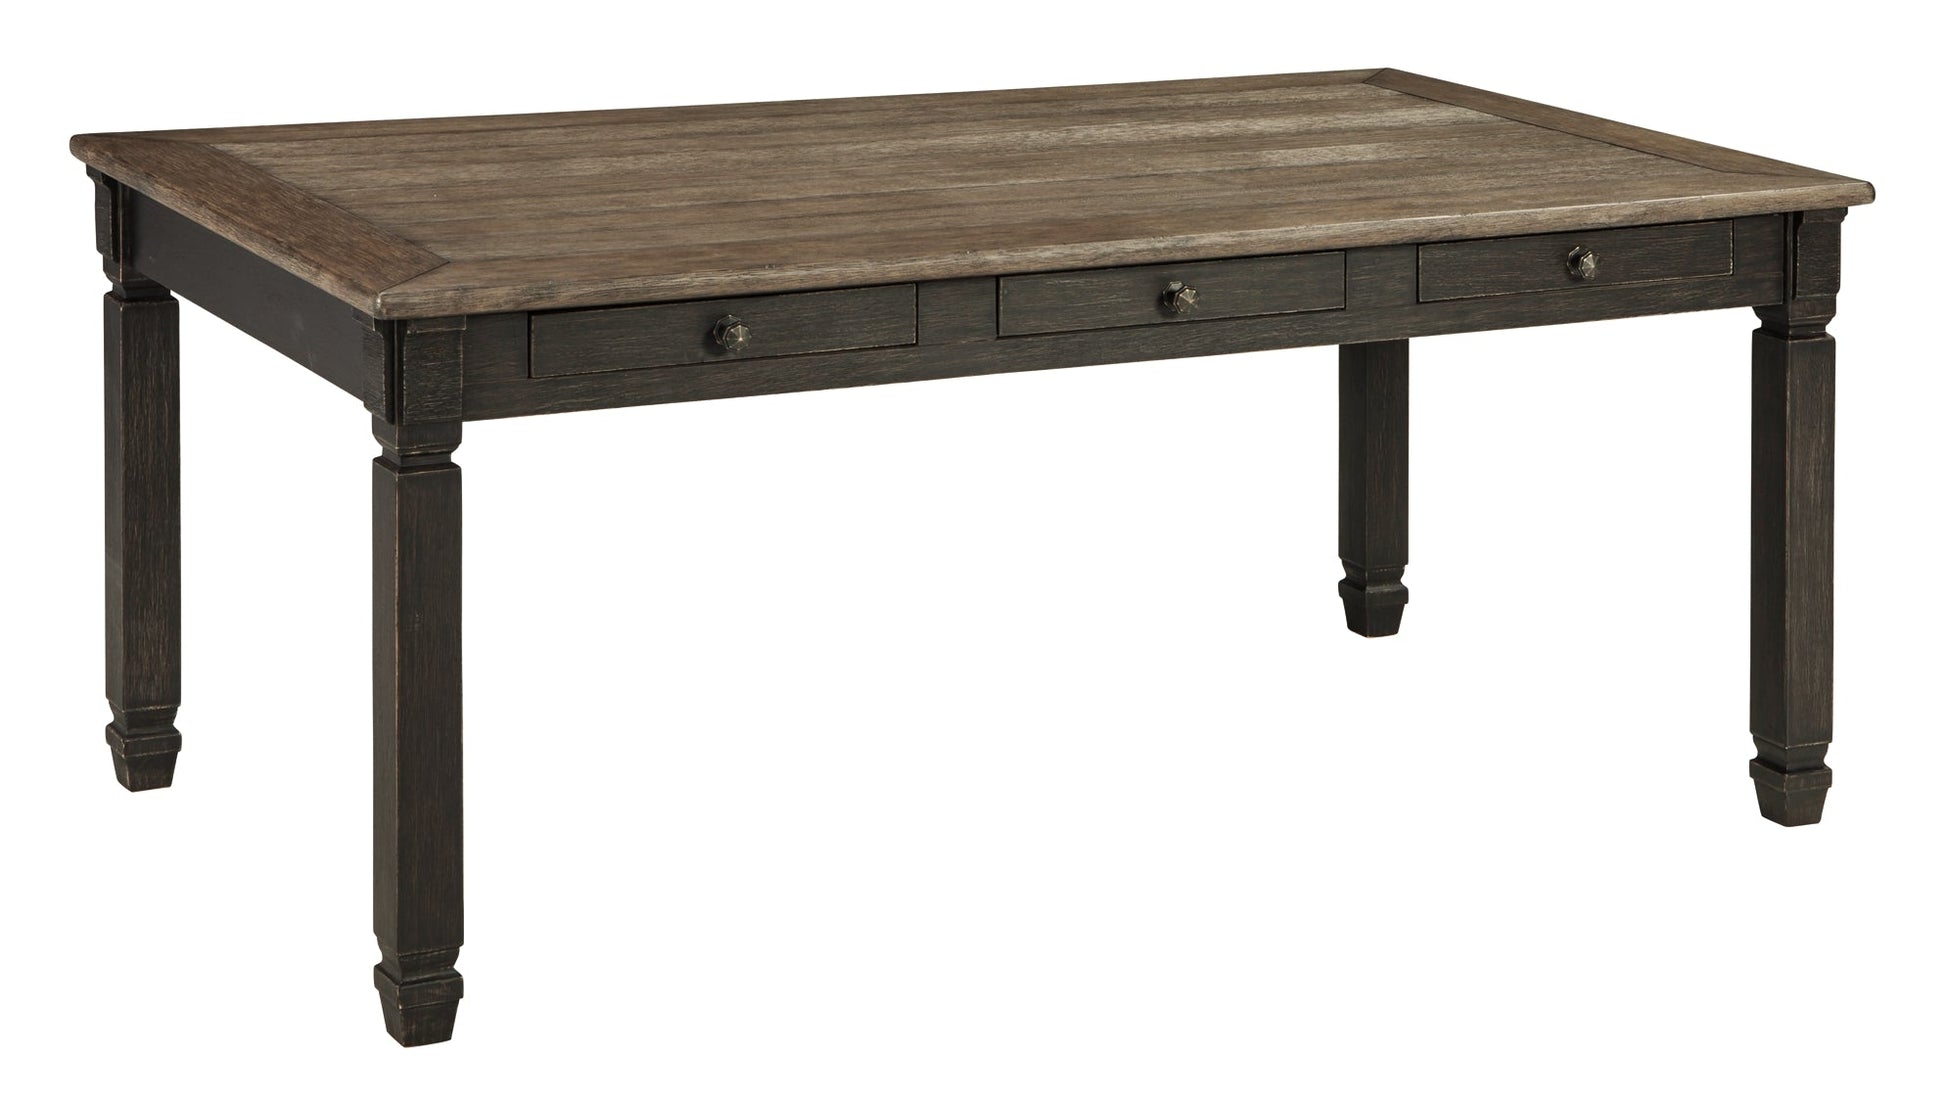 Tyler Creek Dining Table and 4 Chairs and Bench at Walker Mattress and Furniture Locations in Cedar Park and Belton TX.